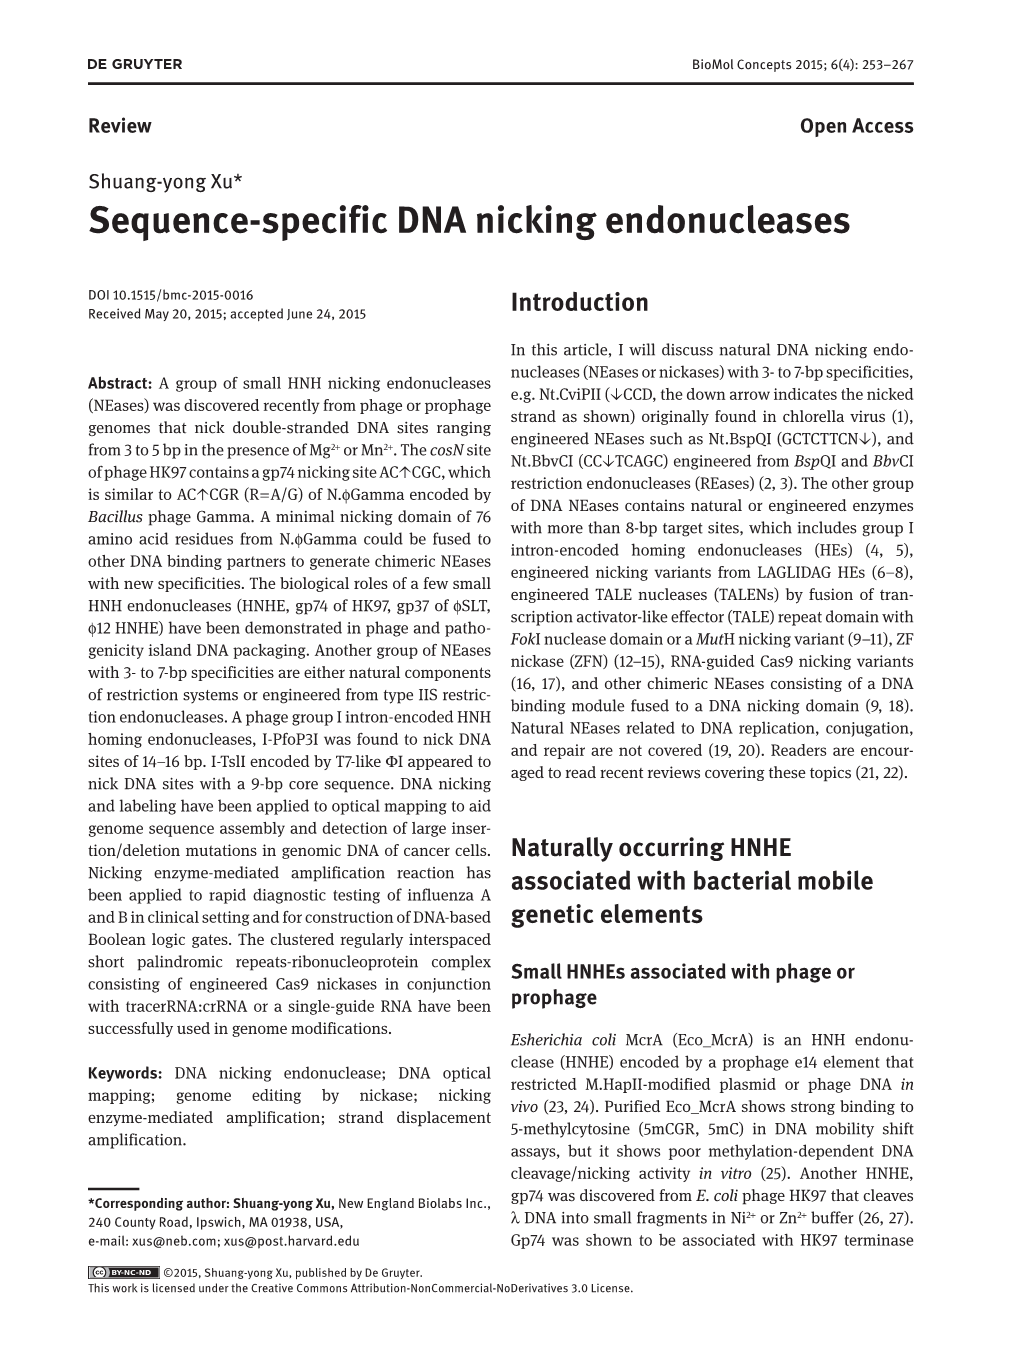 Sequence-Specific DNA Nicking Endonucleases